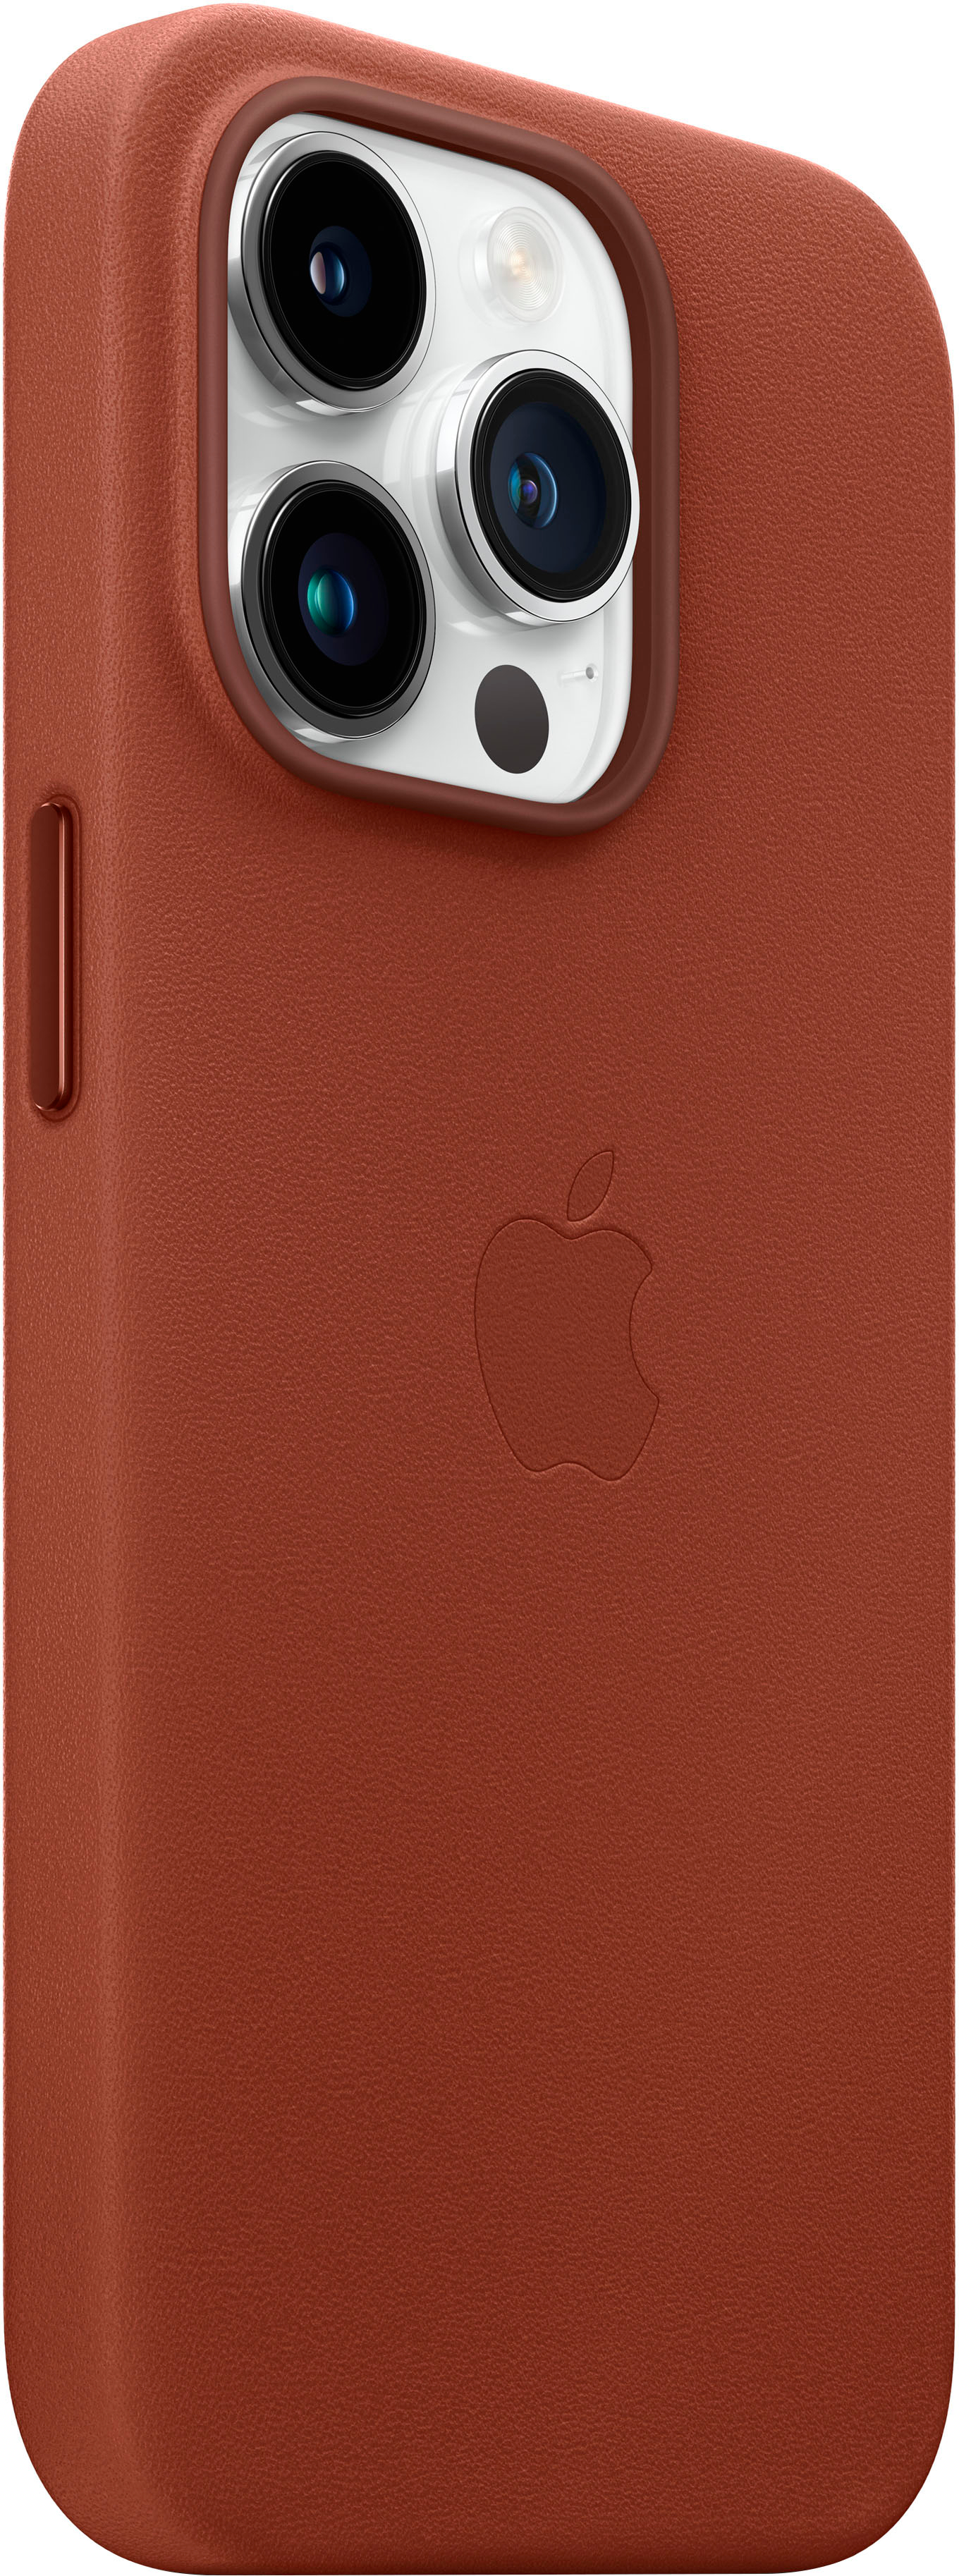 Leather iPhone 14 Pro cases with metal threading now 10% off